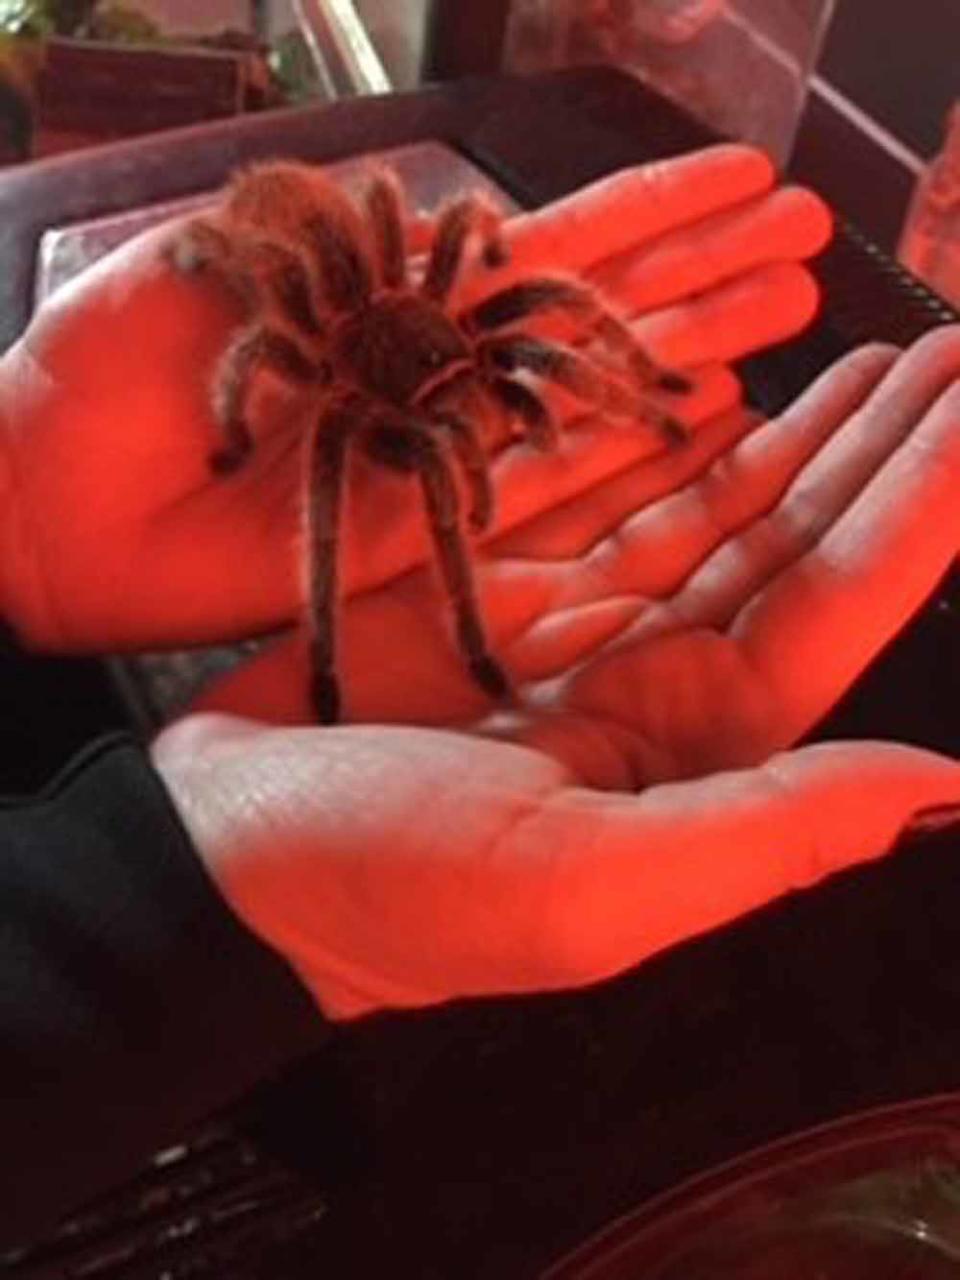 Claire at HorrorCon holding a spider for the very first time (Collect/PA Real Life)